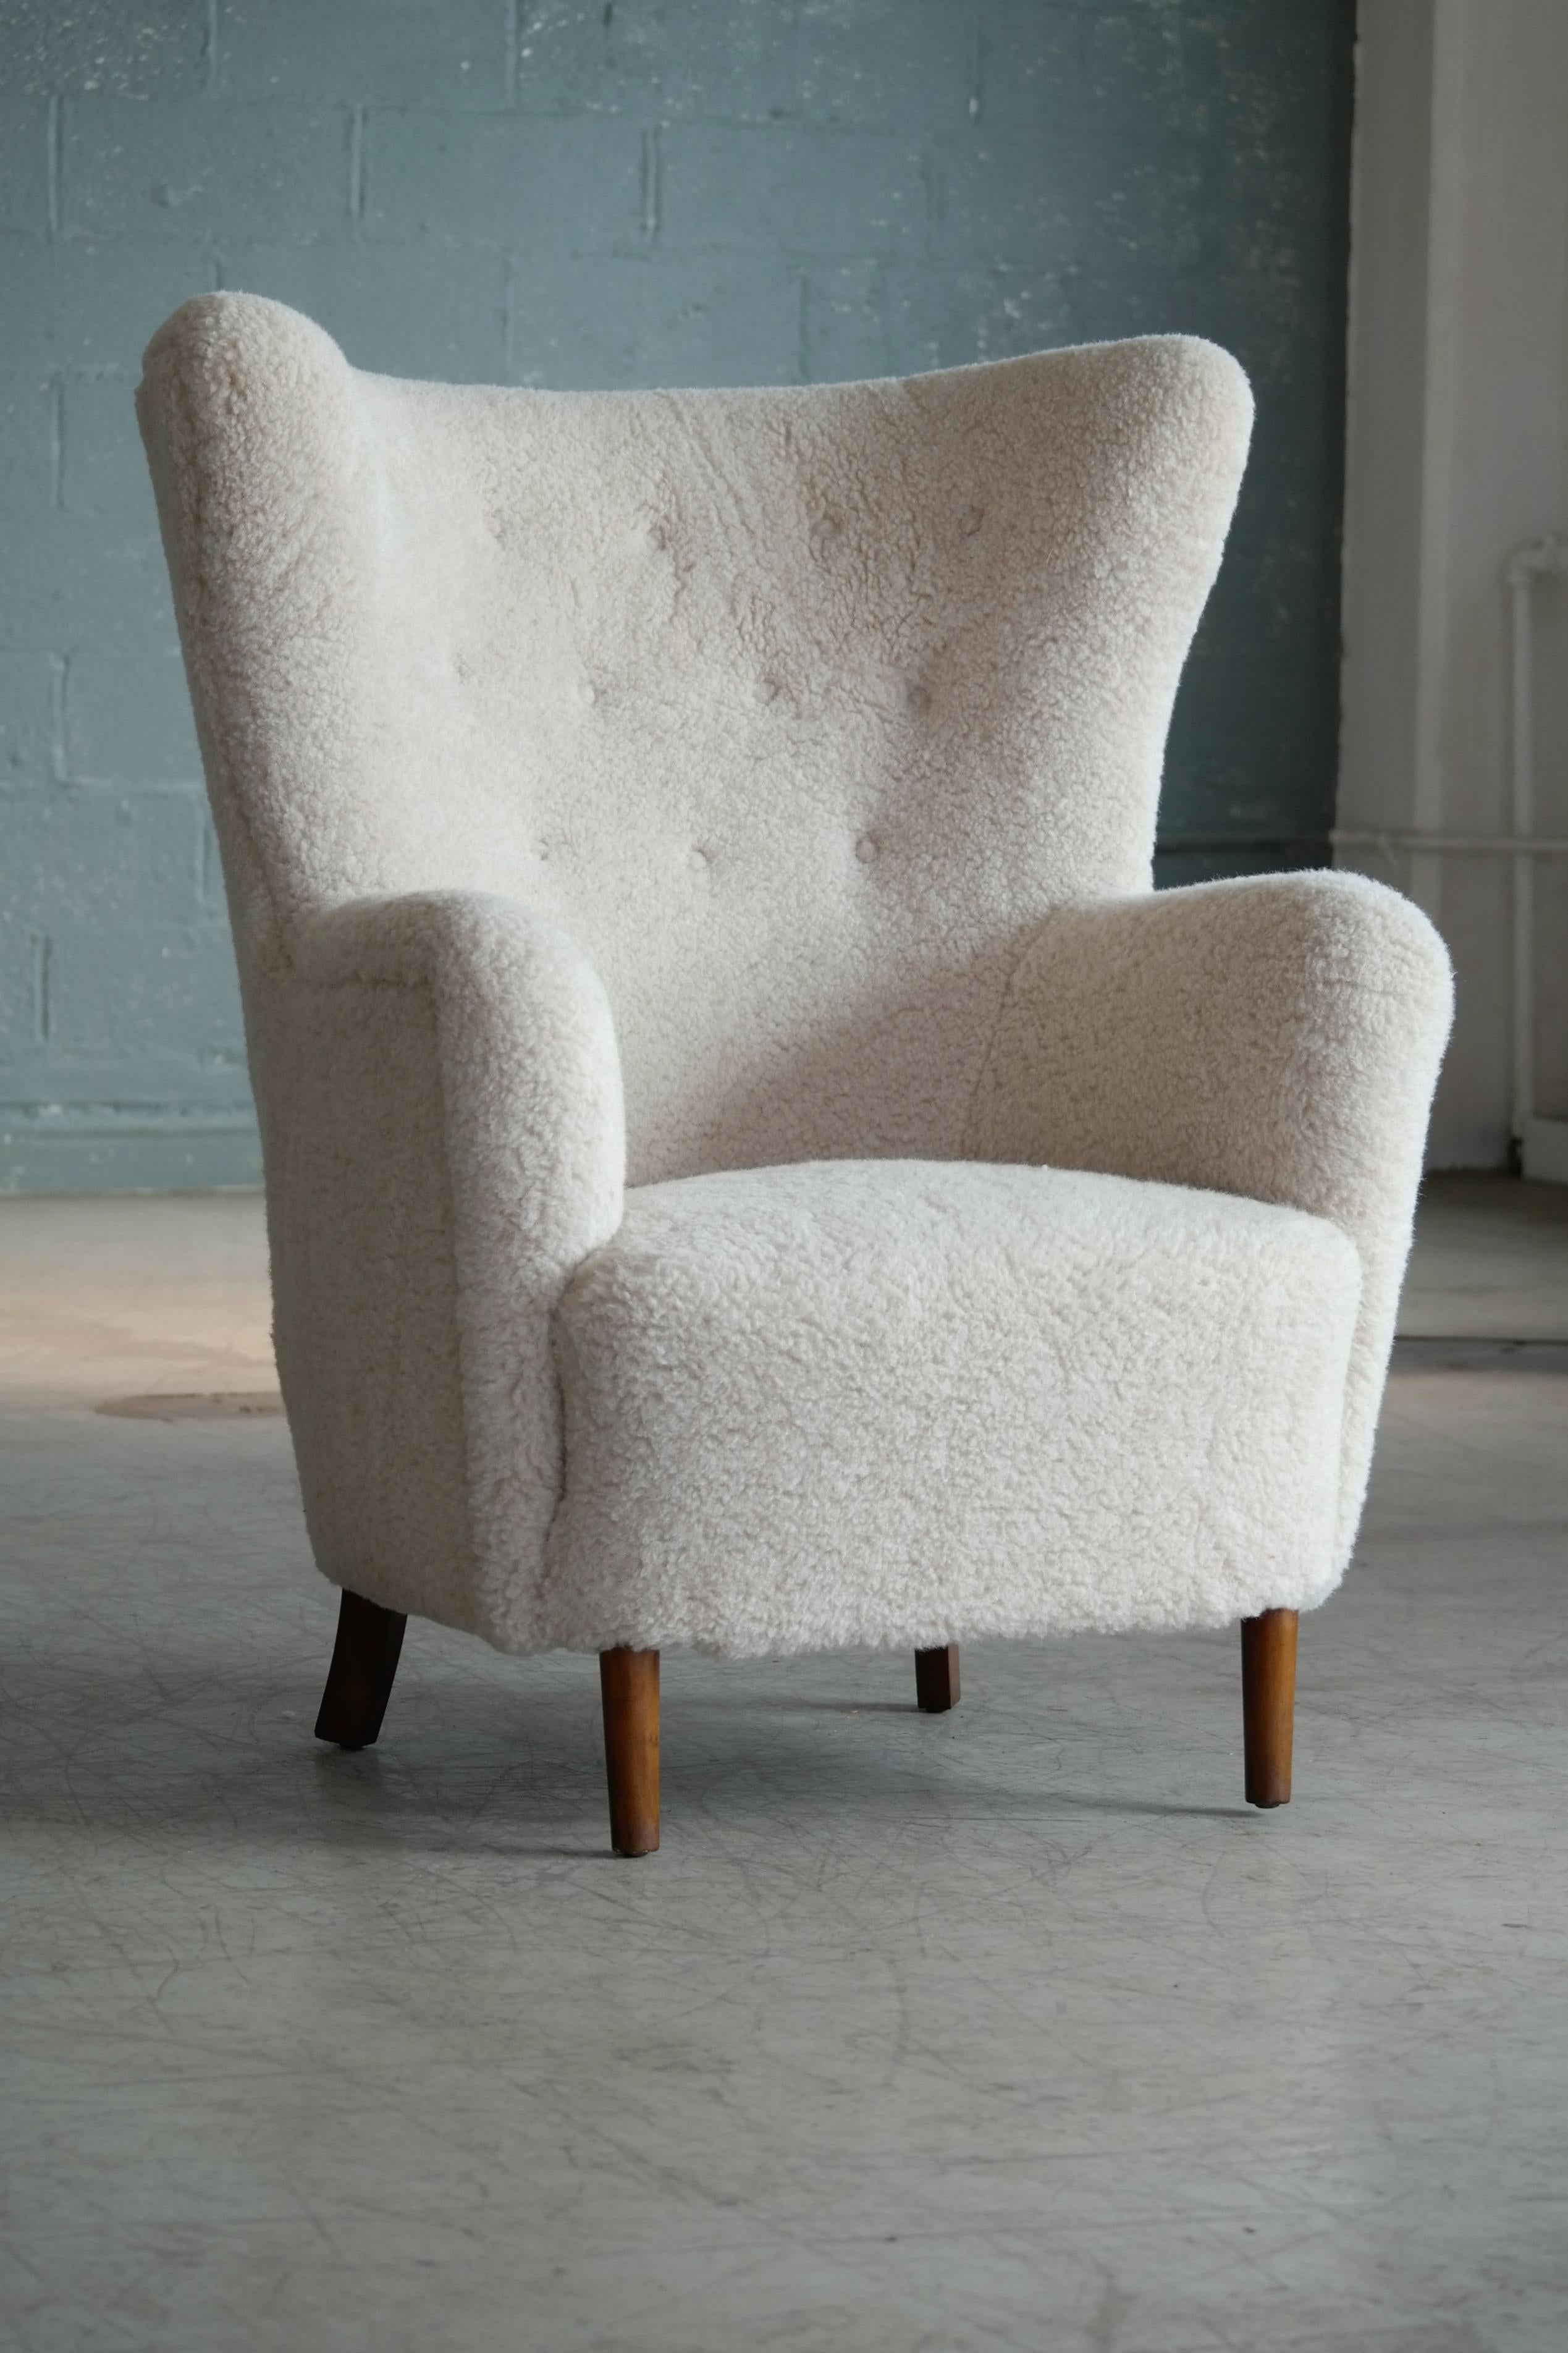 Beautiful and comfortable Flemming Lassen style high back lounge chair made in Denmark, circa 1940. Iconic and ultra-elegant look with the dainty cylindrical front legs and a beautiful silhouette. Perfect statement piece for any room. Spring loaded